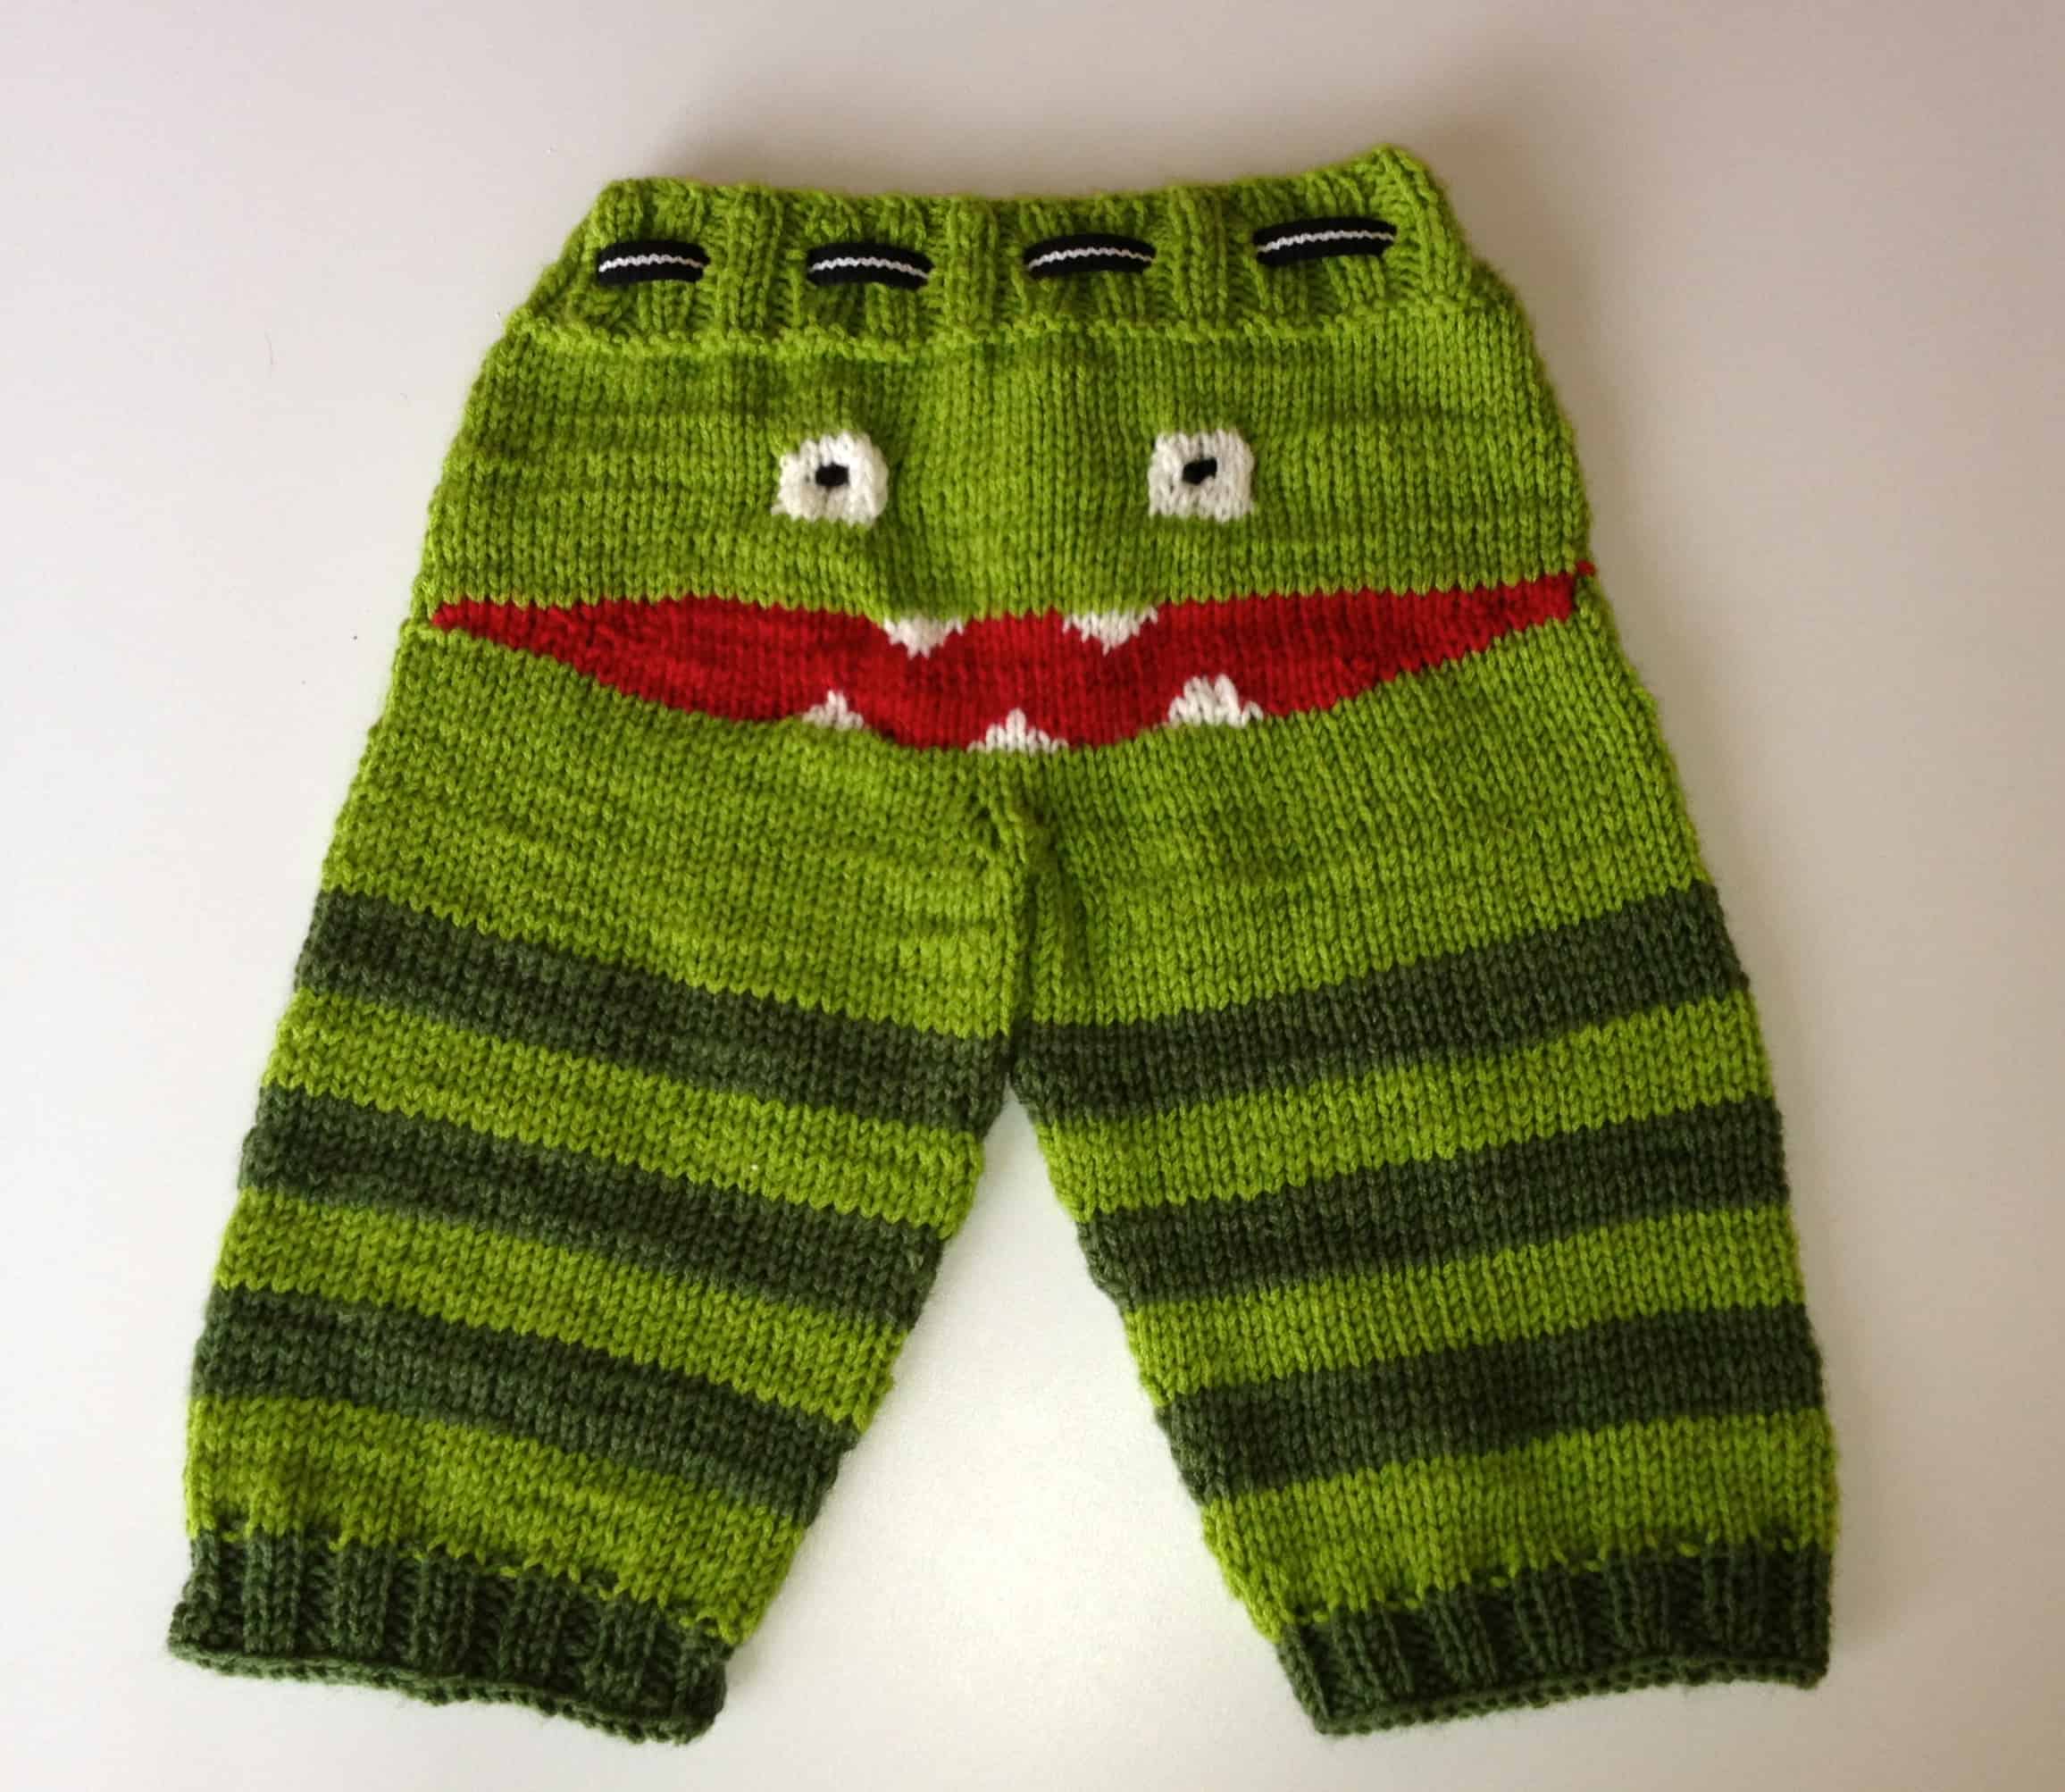 Knitted monster pants